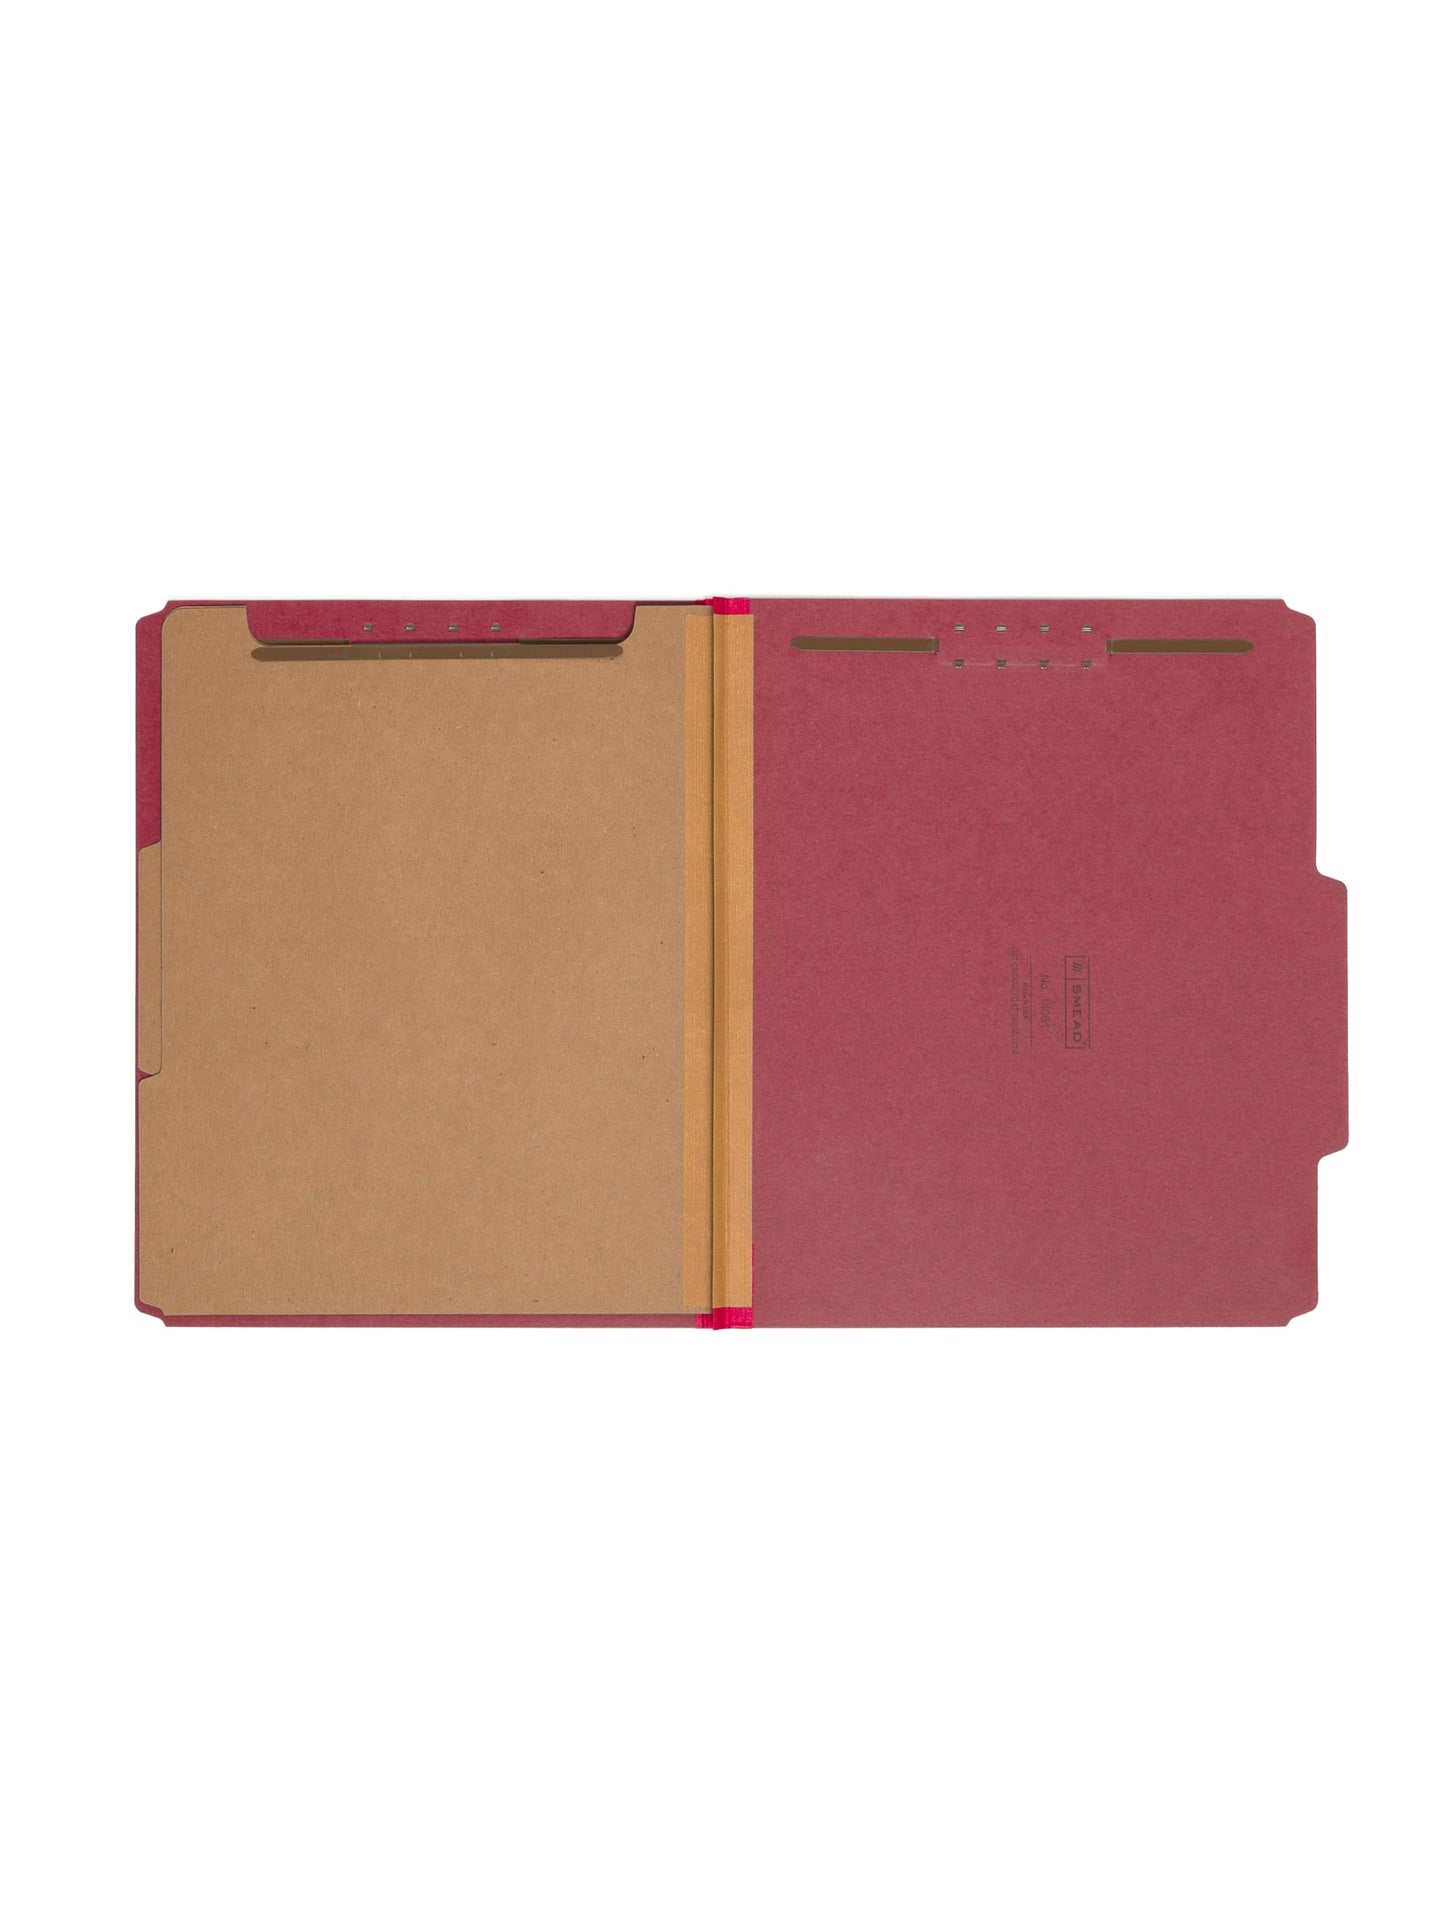 Pressboard Classification File Folders, 2 Dividers, 2 inch Expansion, Bright Red Color, Letter Size, Set of 0, 30086486140615